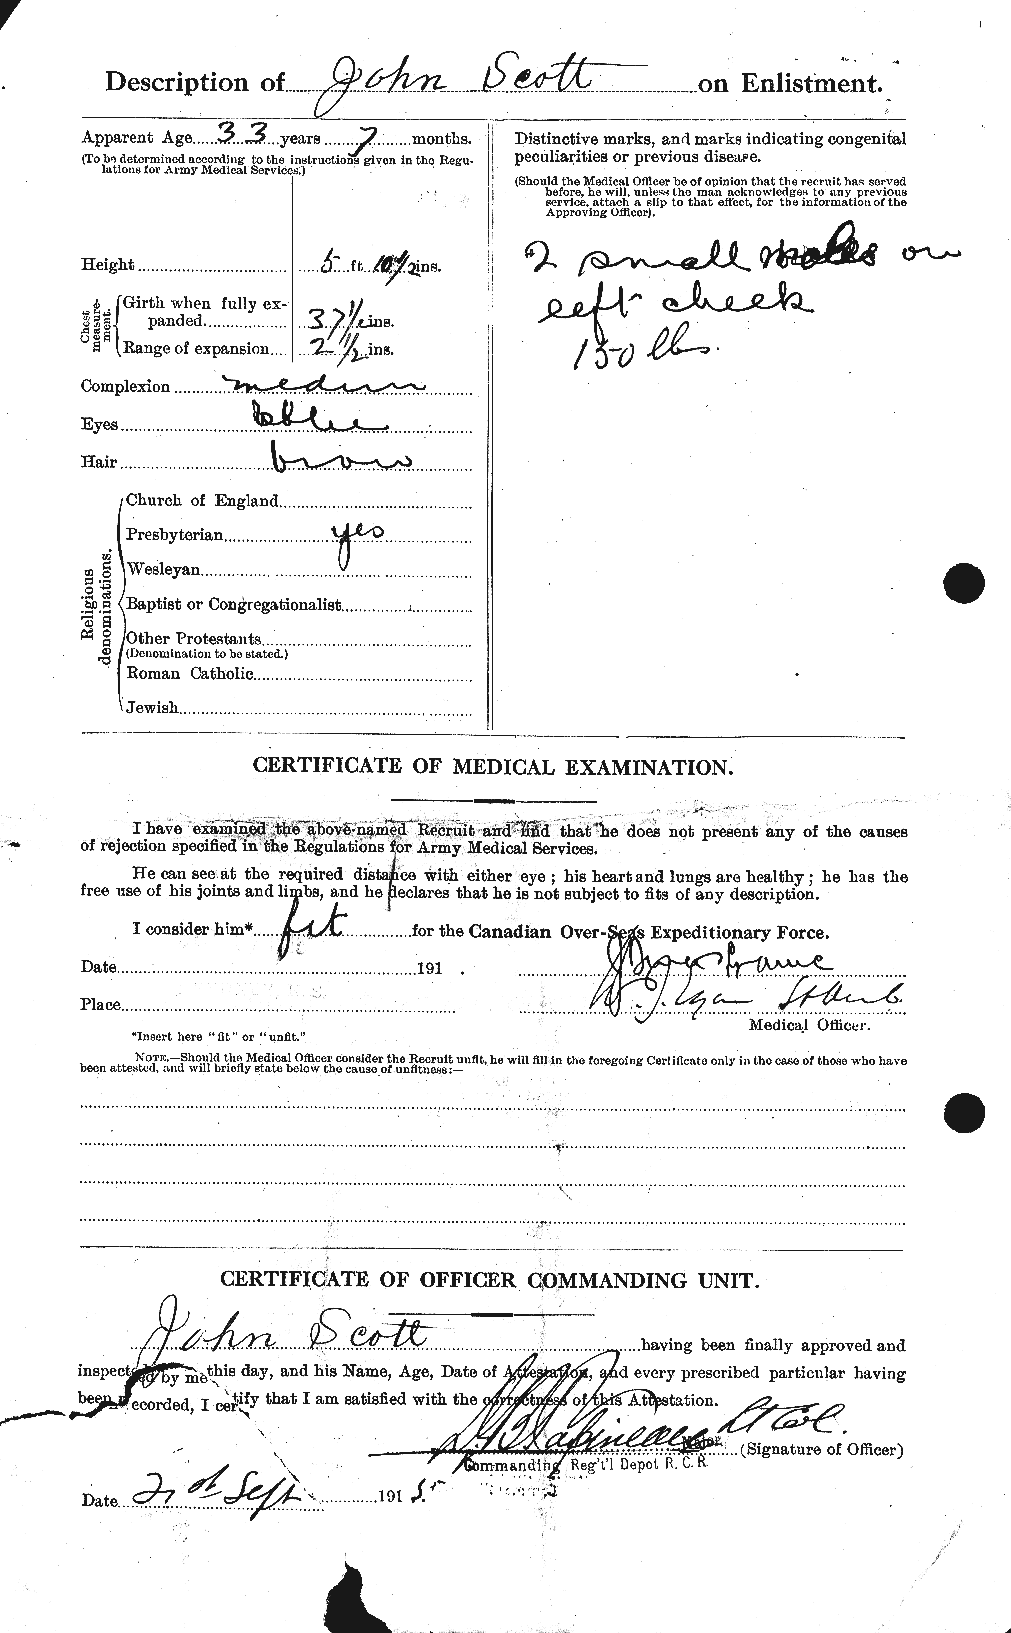 Personnel Records of the First World War - CEF 084917b